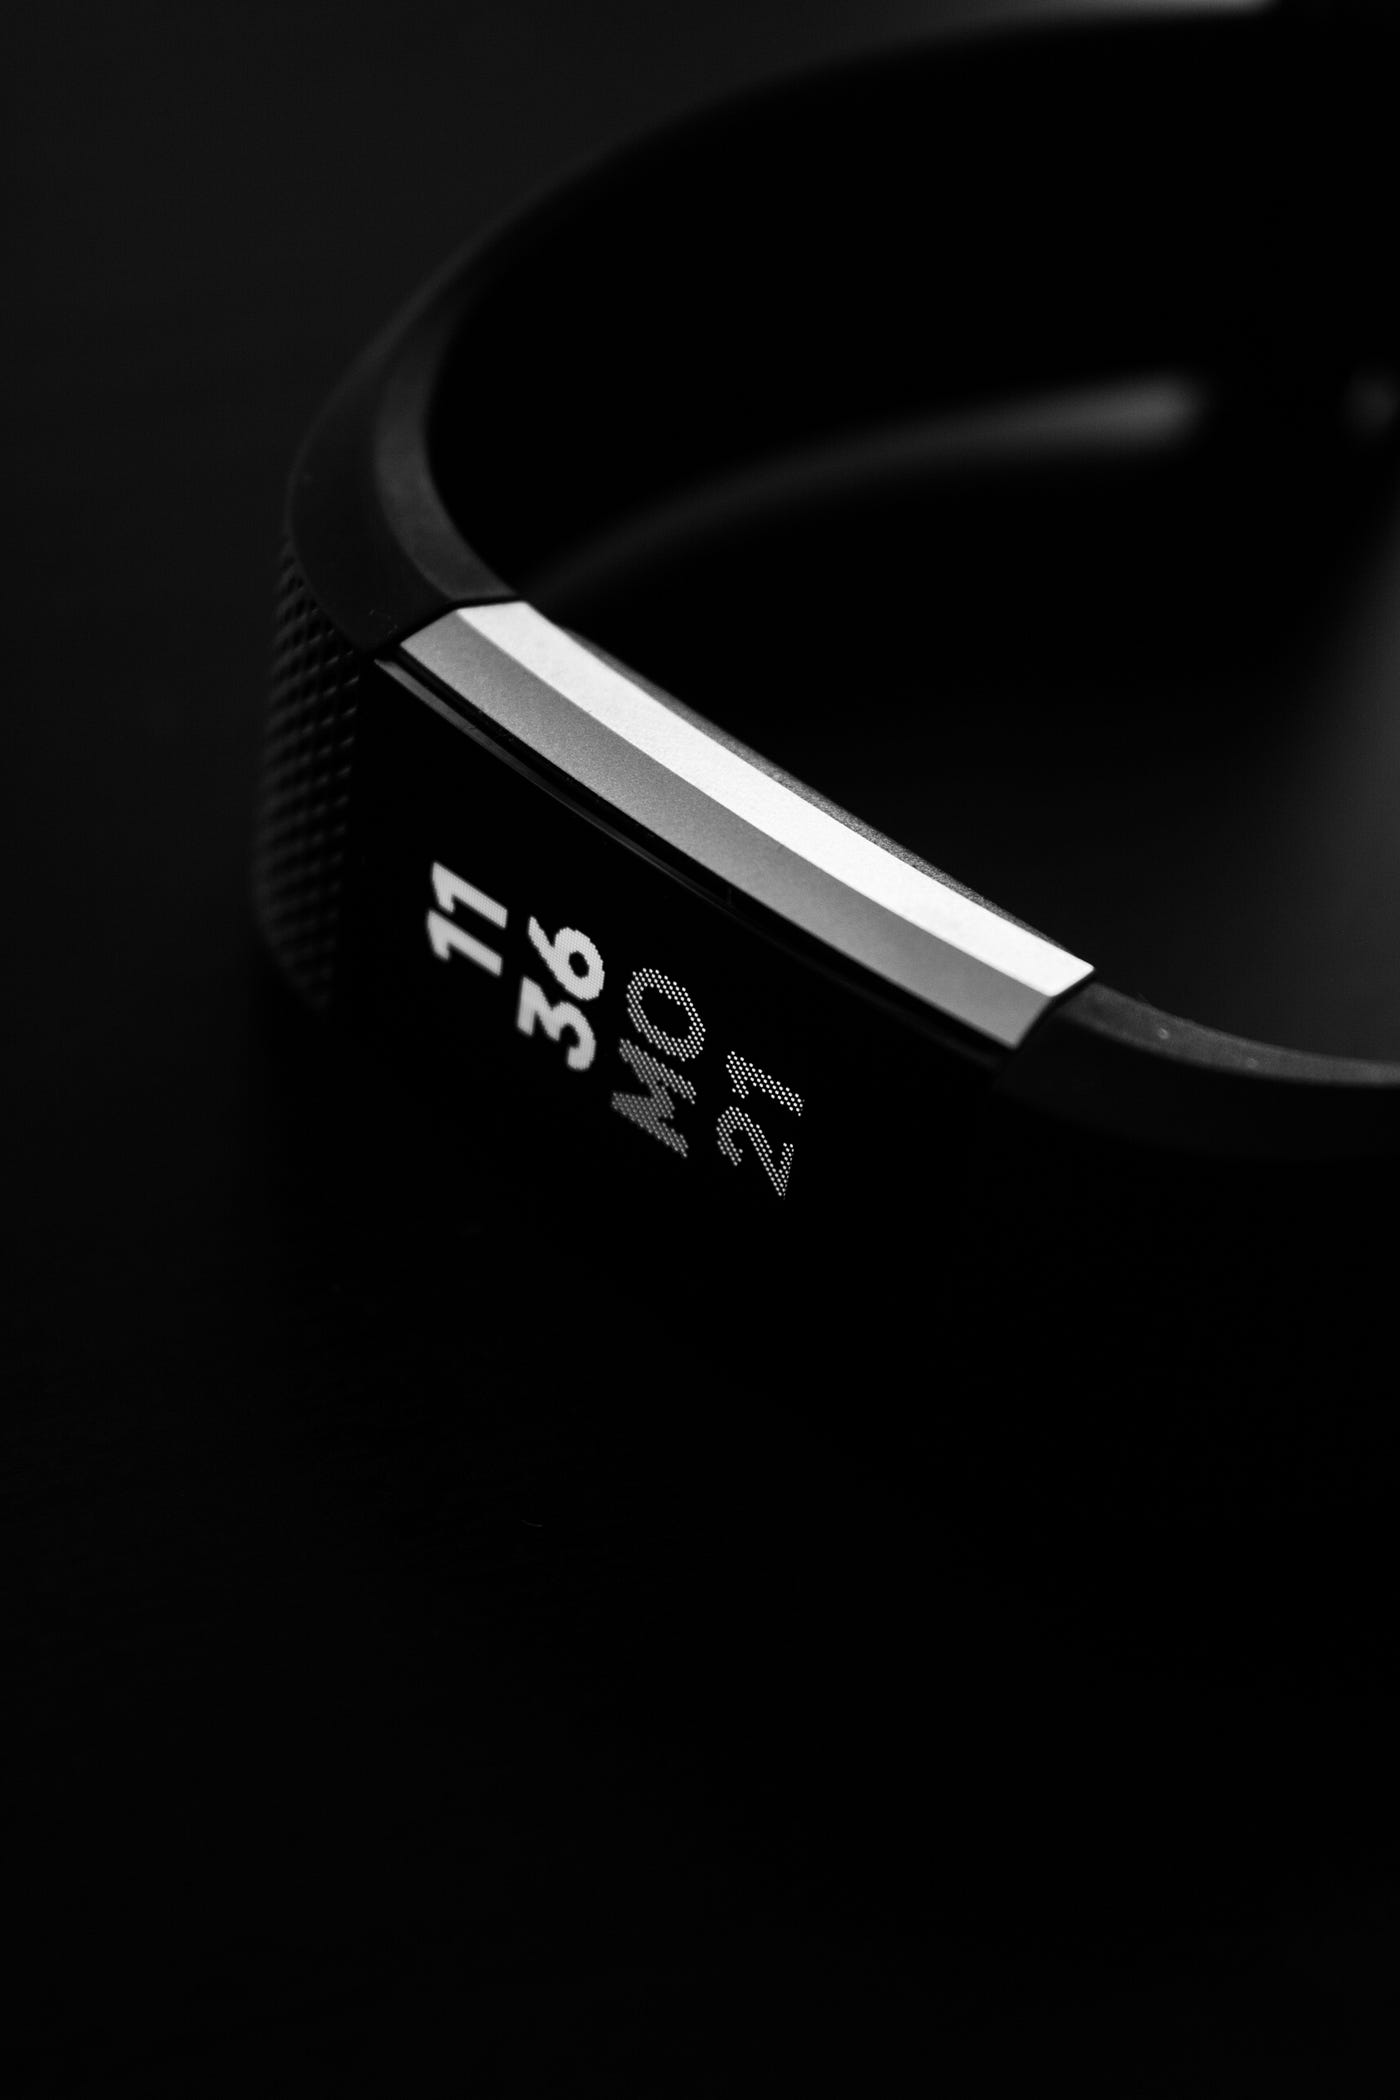 A black Fitbit activity tracker lies diagonally across the image. The device reads 11:36, is black, and has silver edges around the watch part.